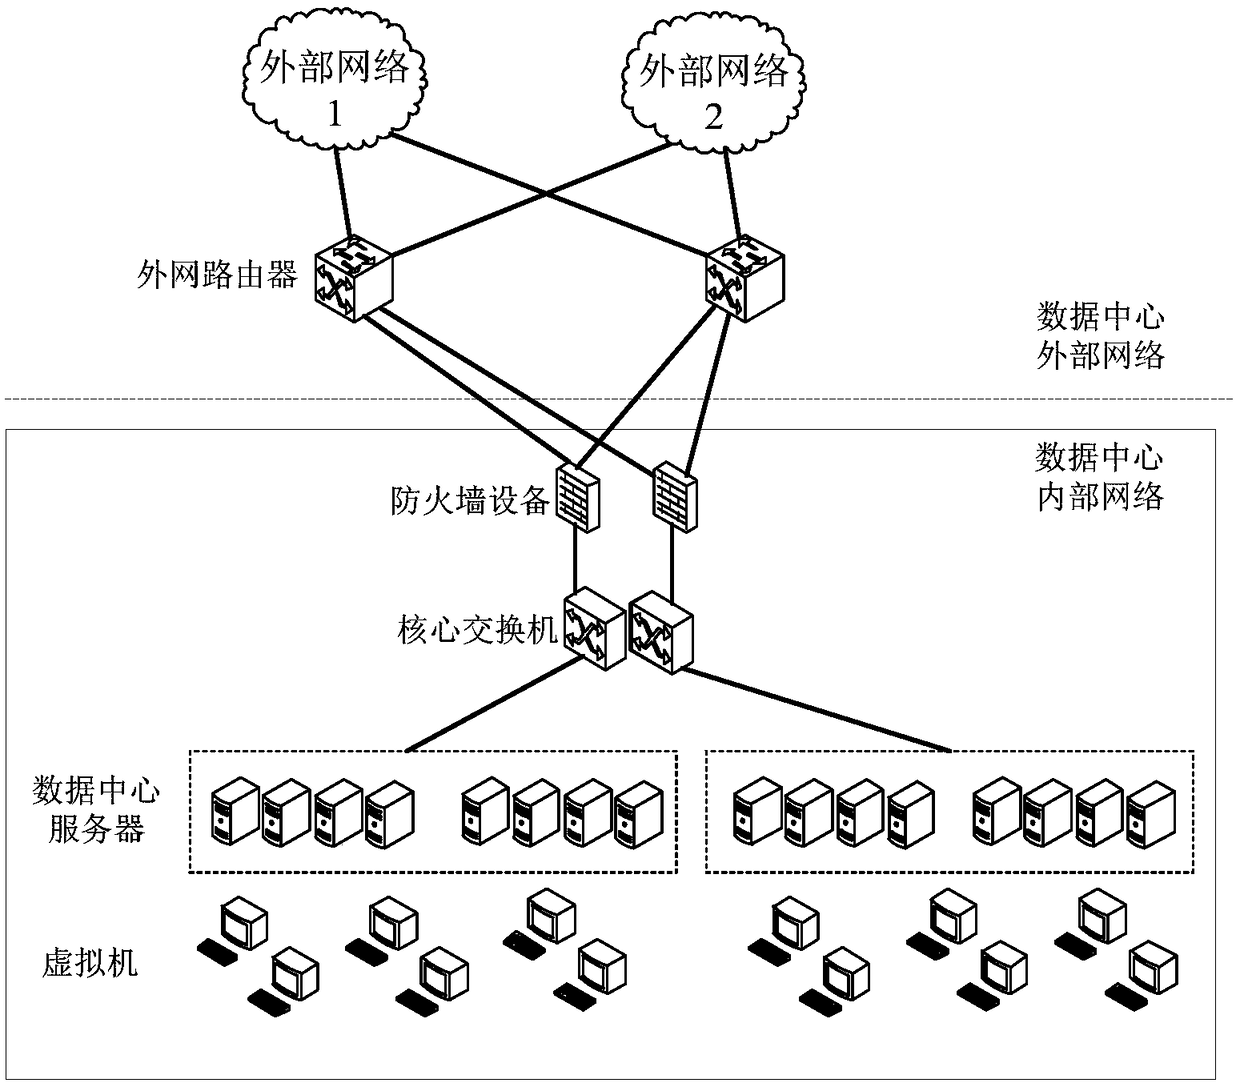 Network processing method, cloud platform and SDN controller